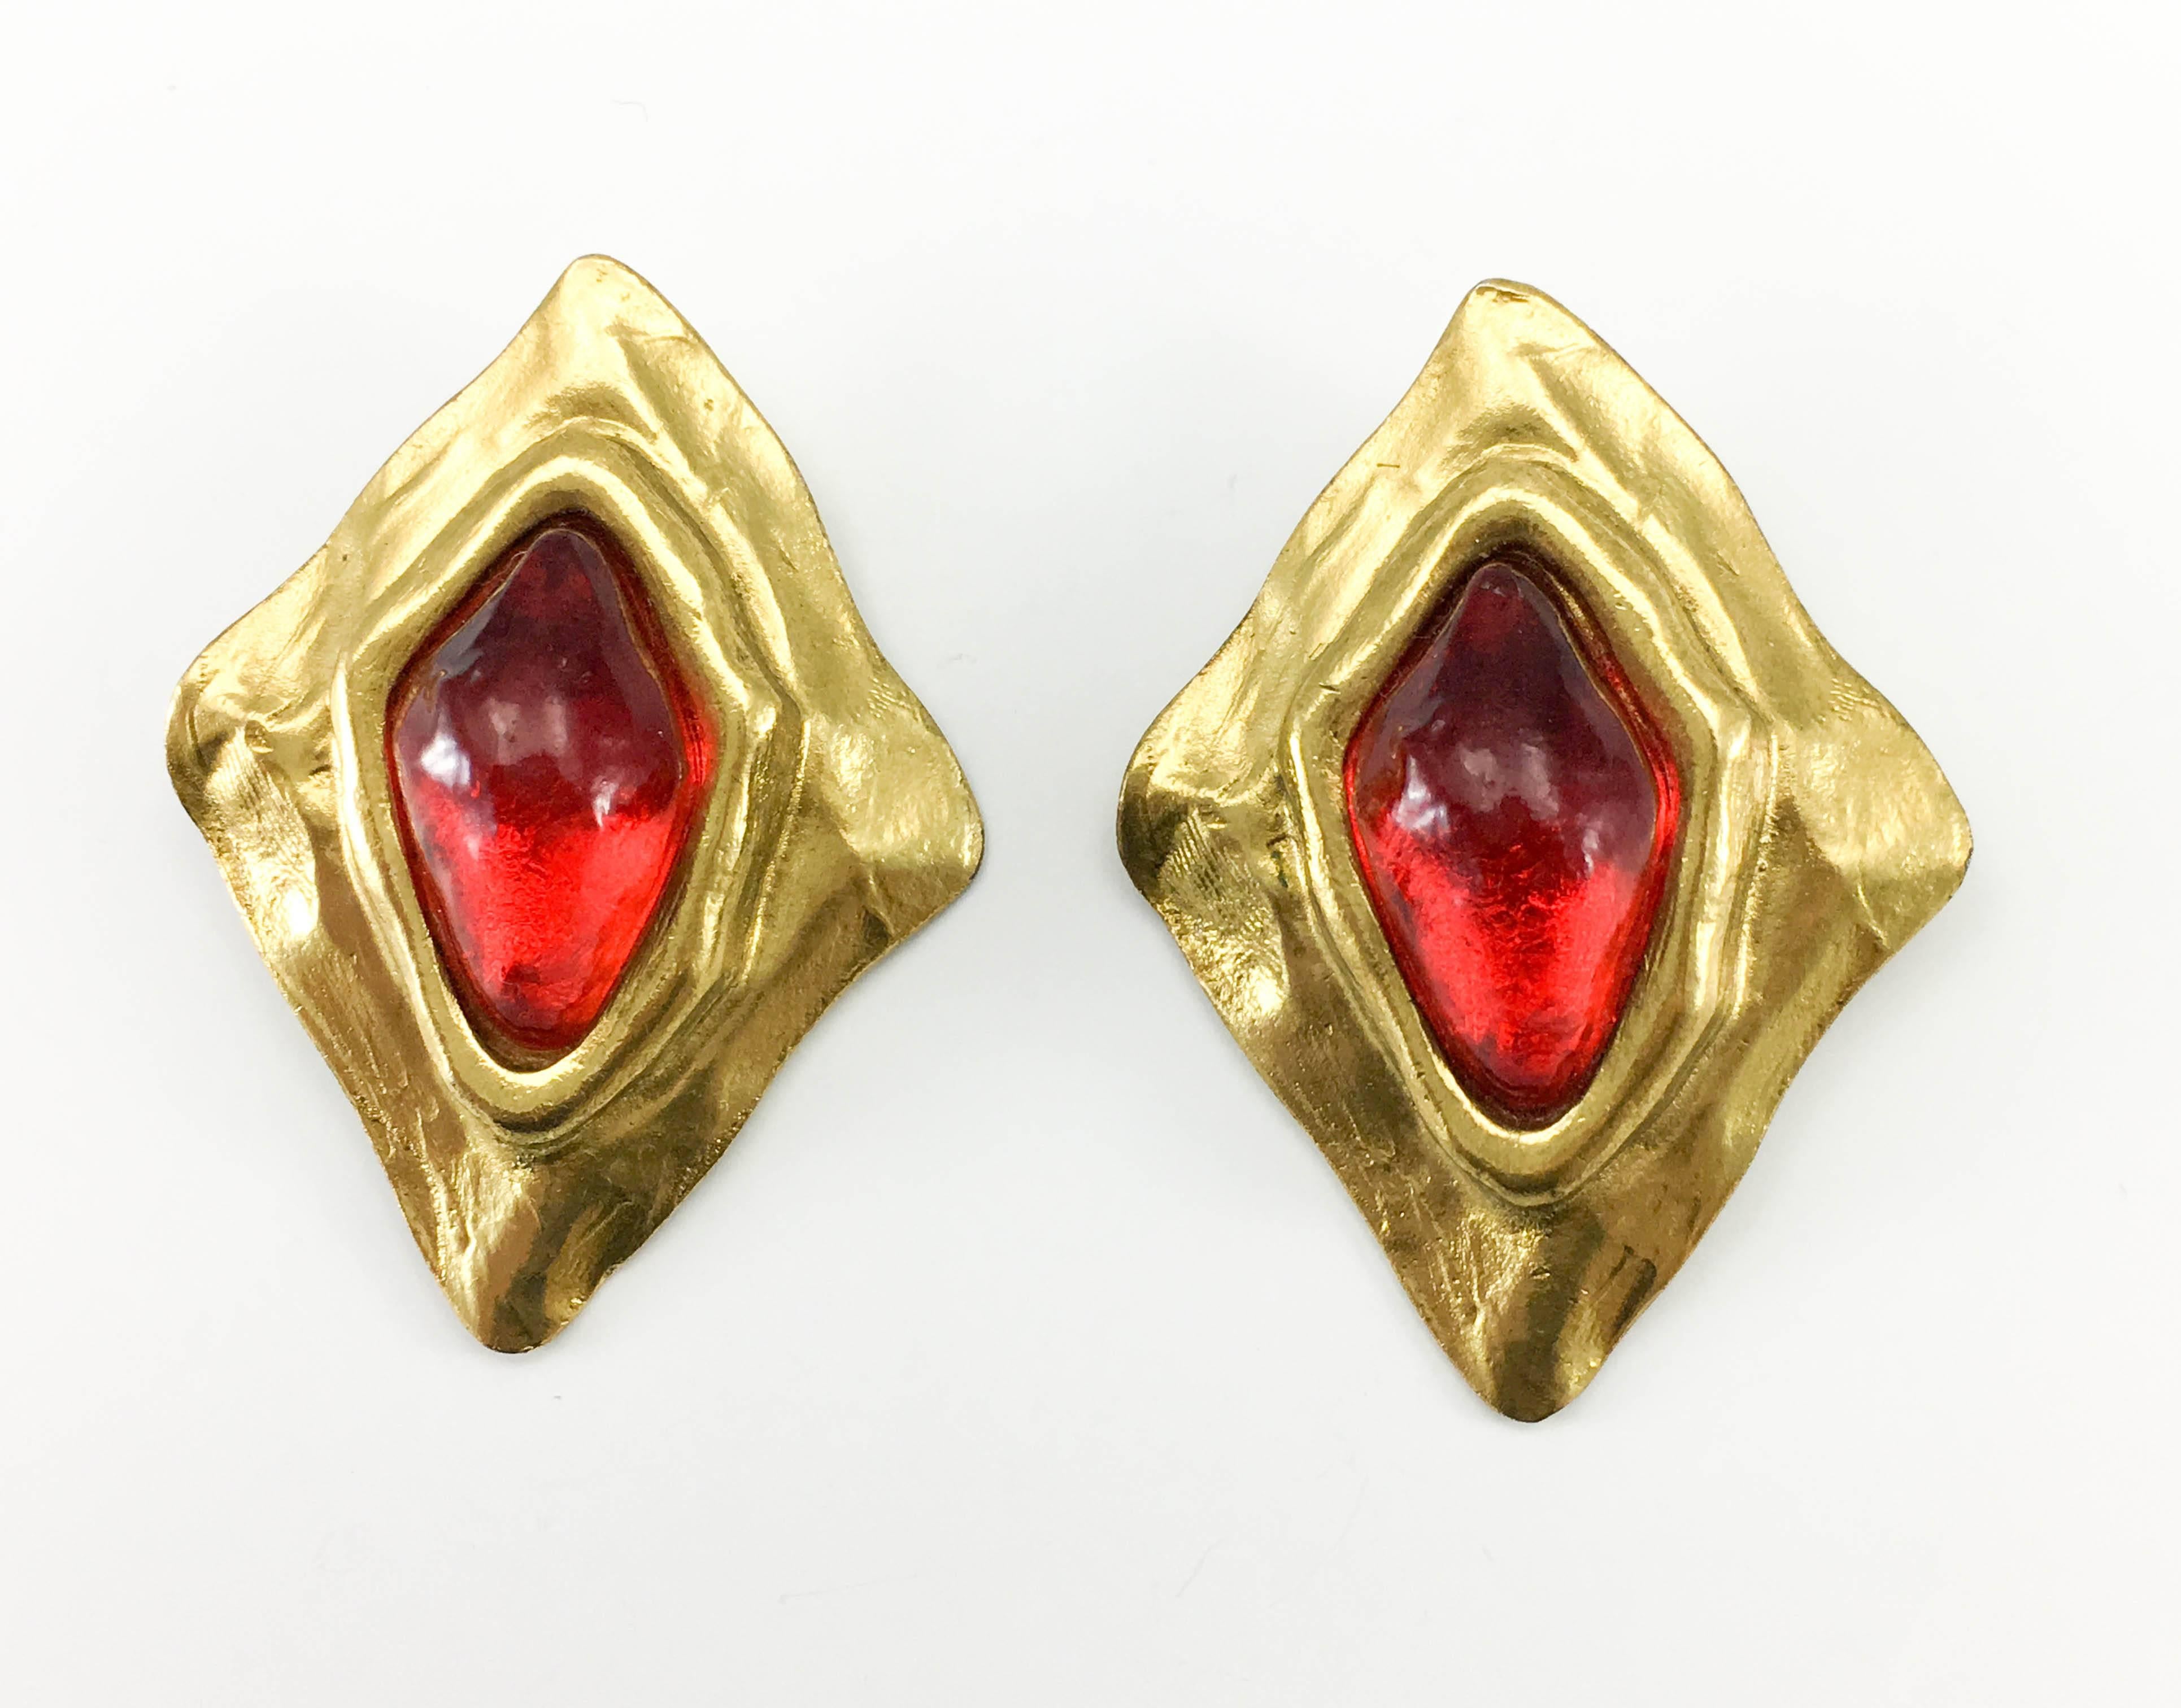 1980s Yves Saint Laurent Large Red Gripoix Gold-Plated Earrings by Goossens In Excellent Condition In London, Chelsea